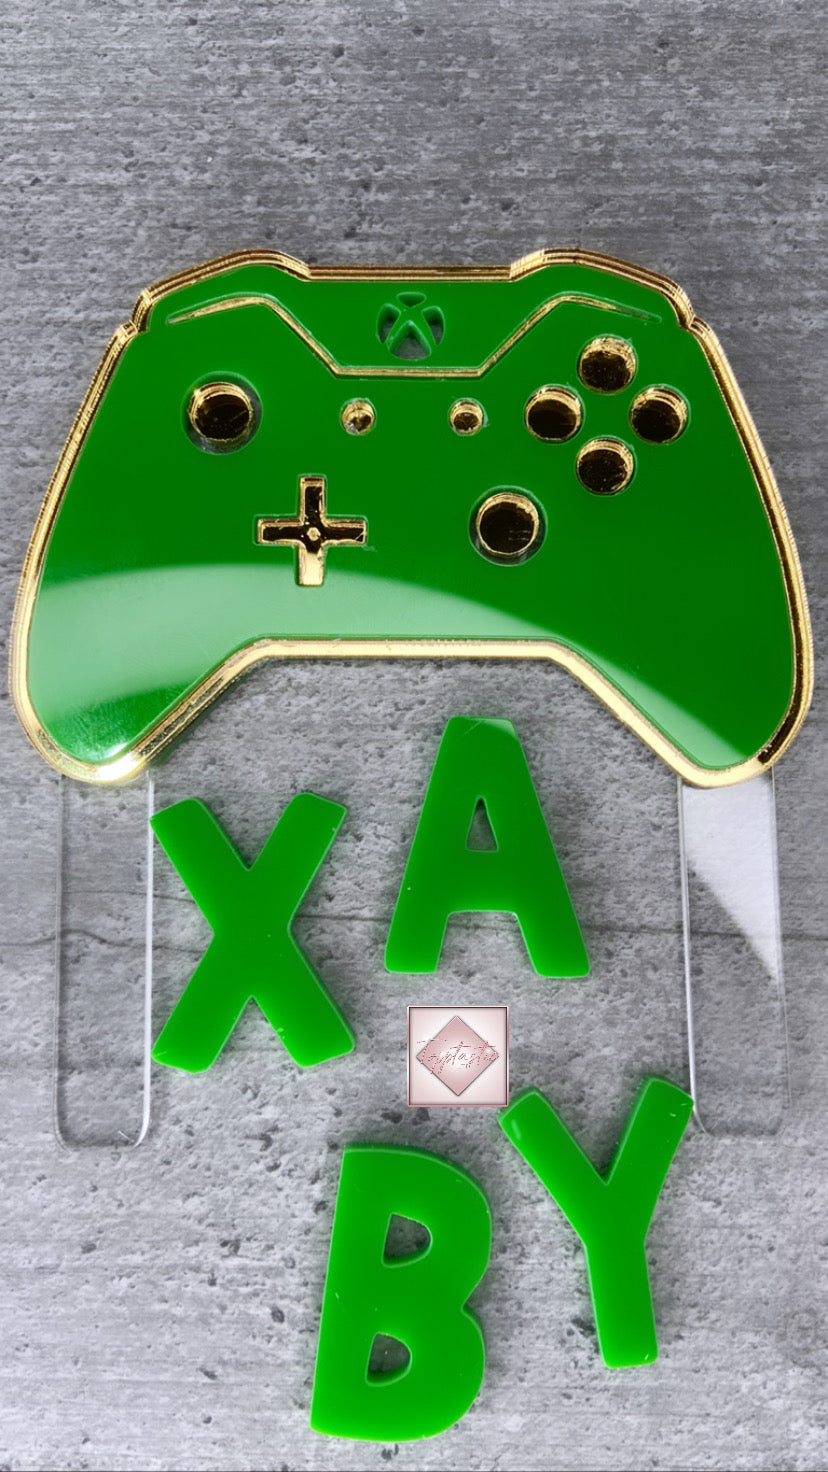 Gaming / XBox Acrylic Cake / Cupcake toppers